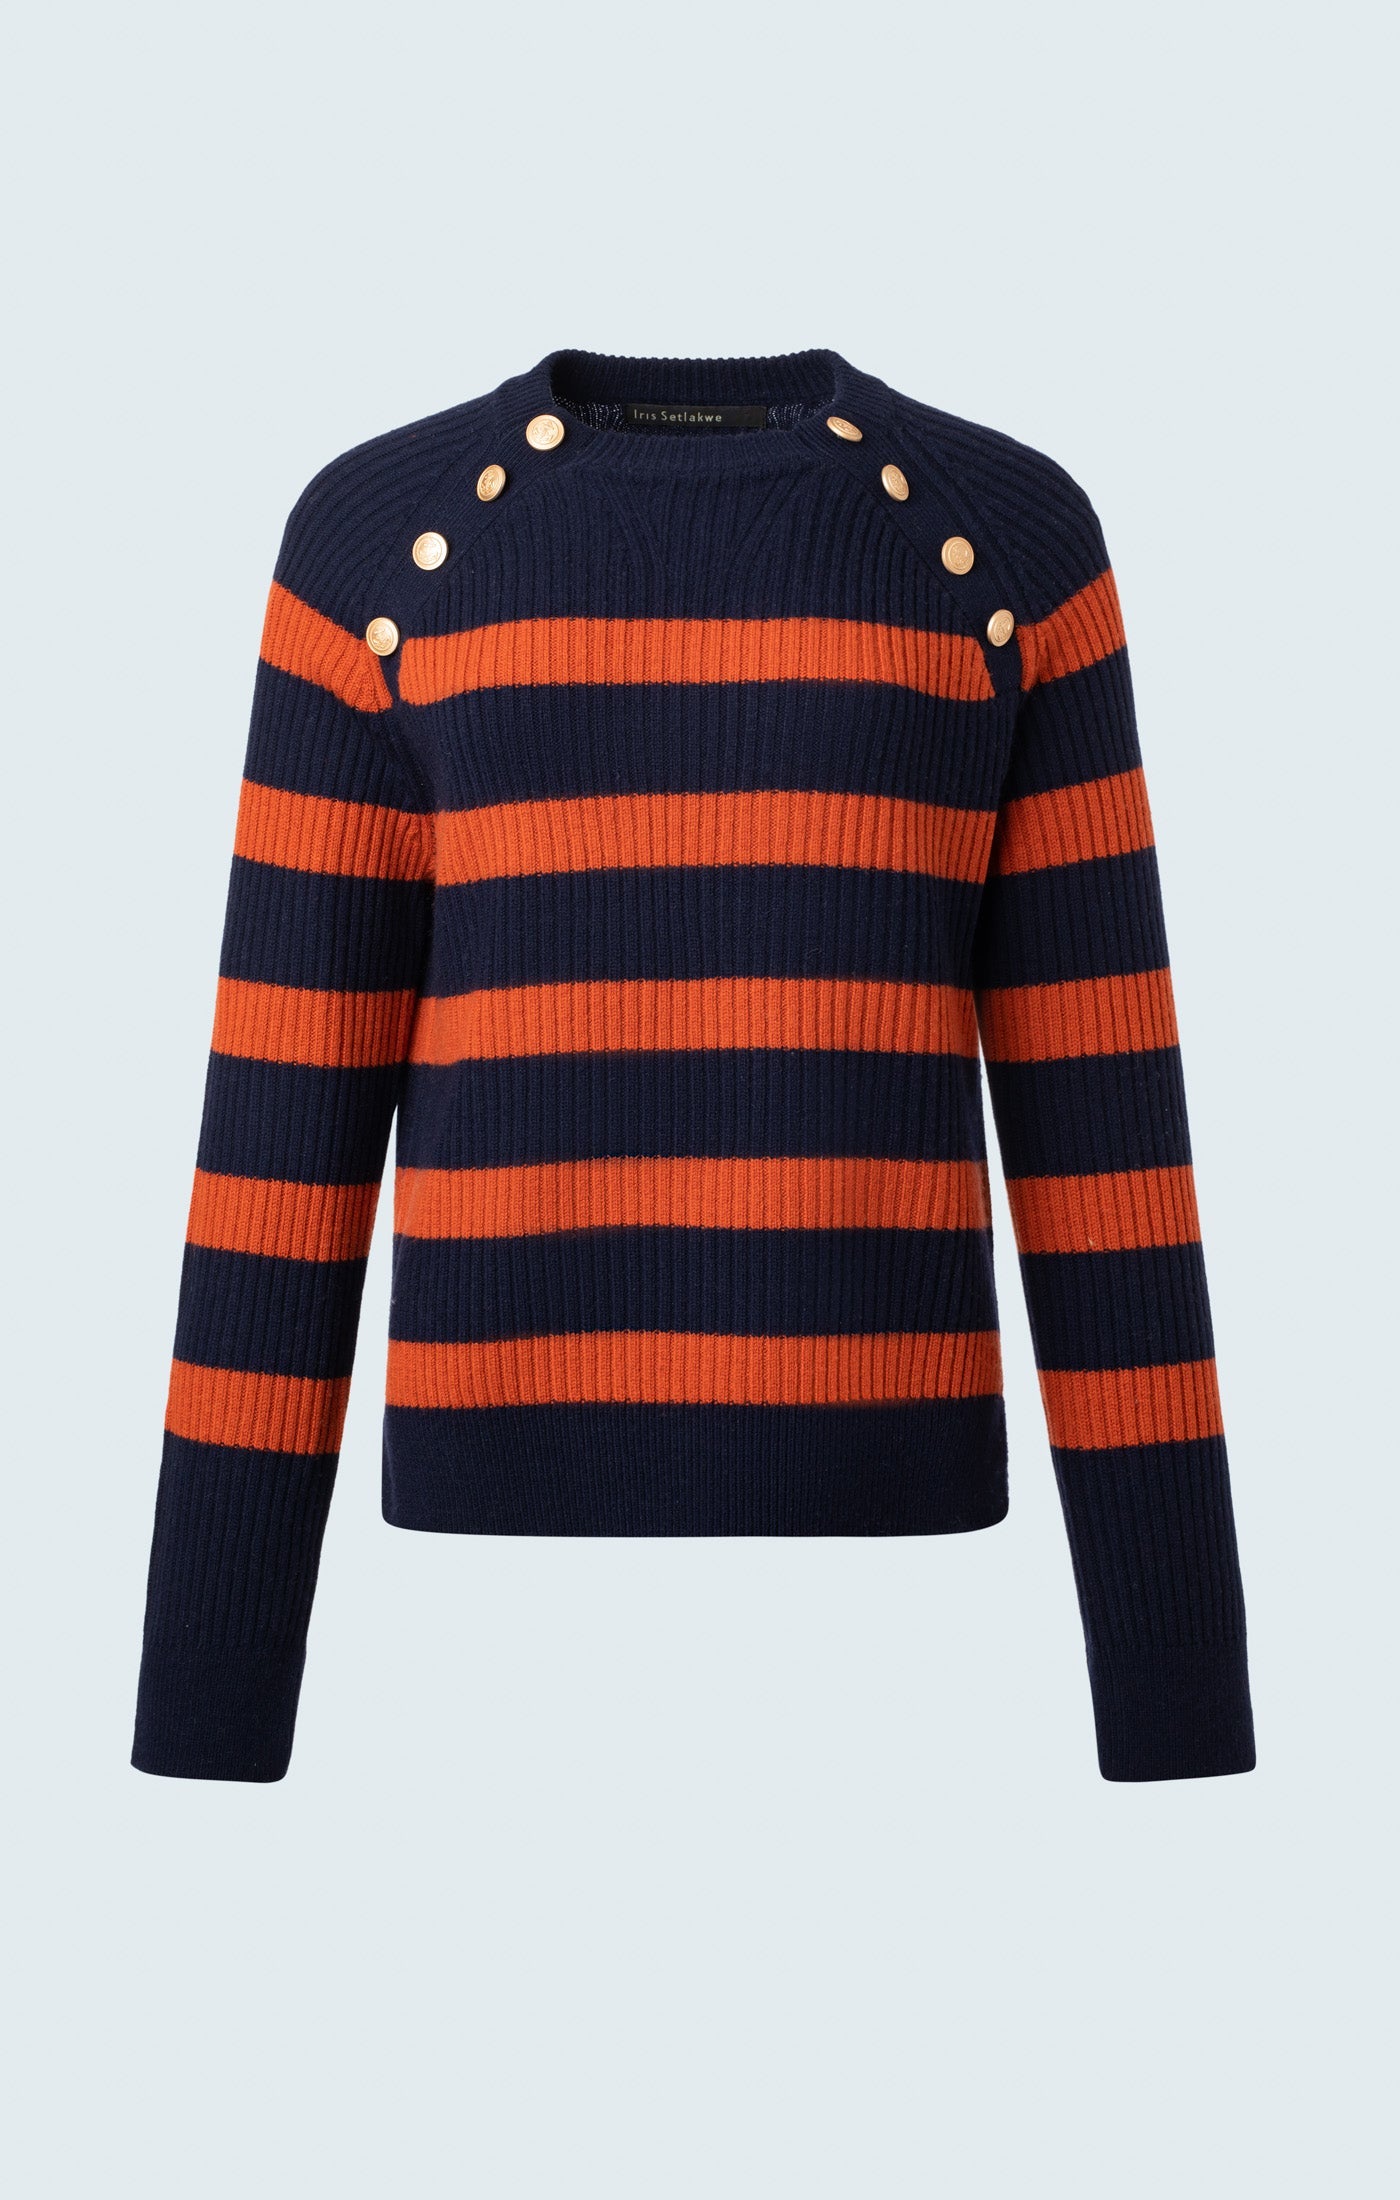 Boxy sailor stripe crew neck sweater with button detail